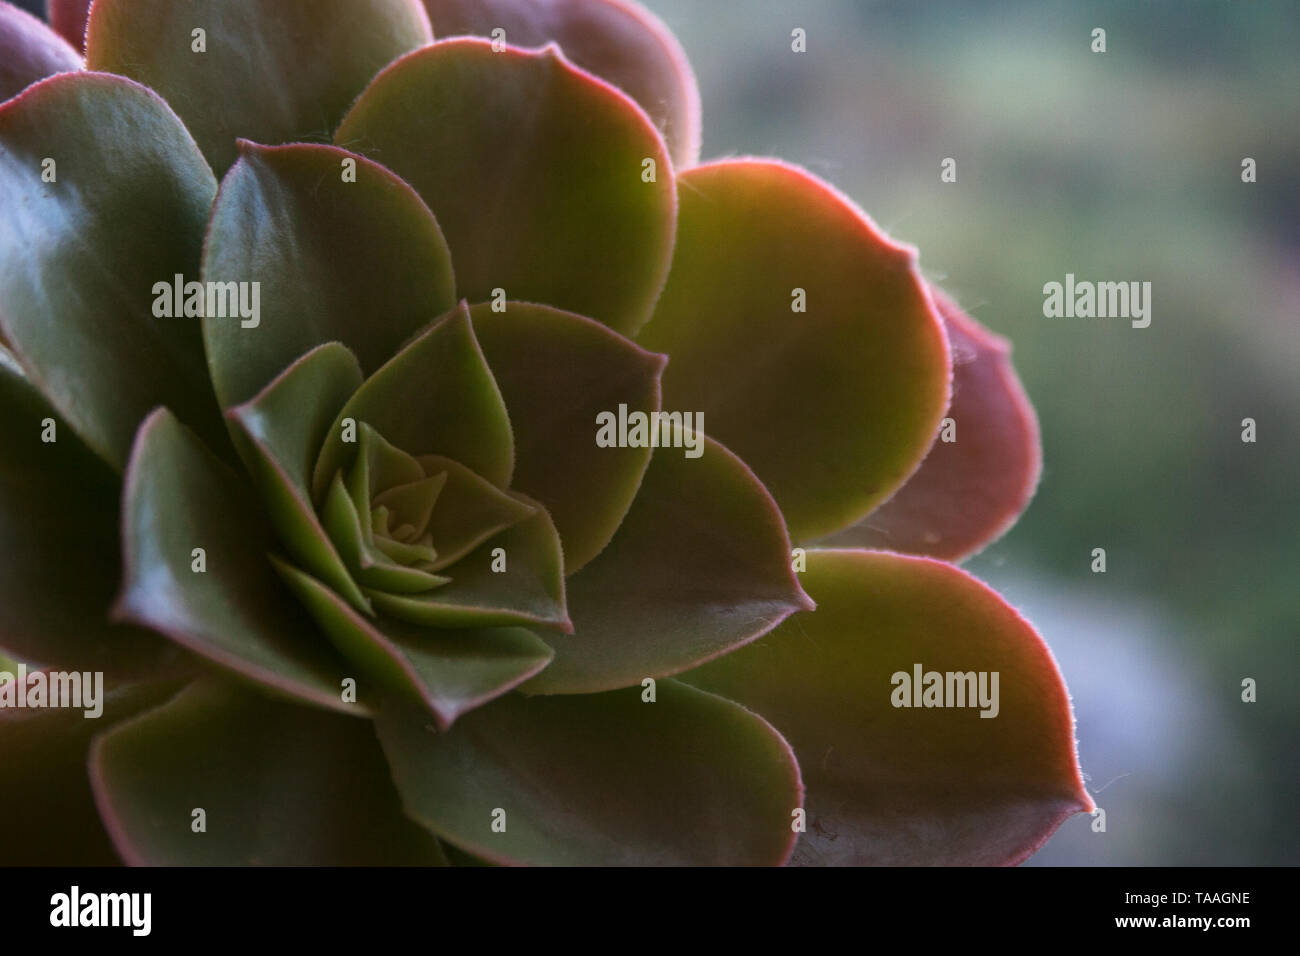 Aeonium Succulent Plant Rosette With Green To Pink And Yellow Leaves Close Up Stock Photo Alamy